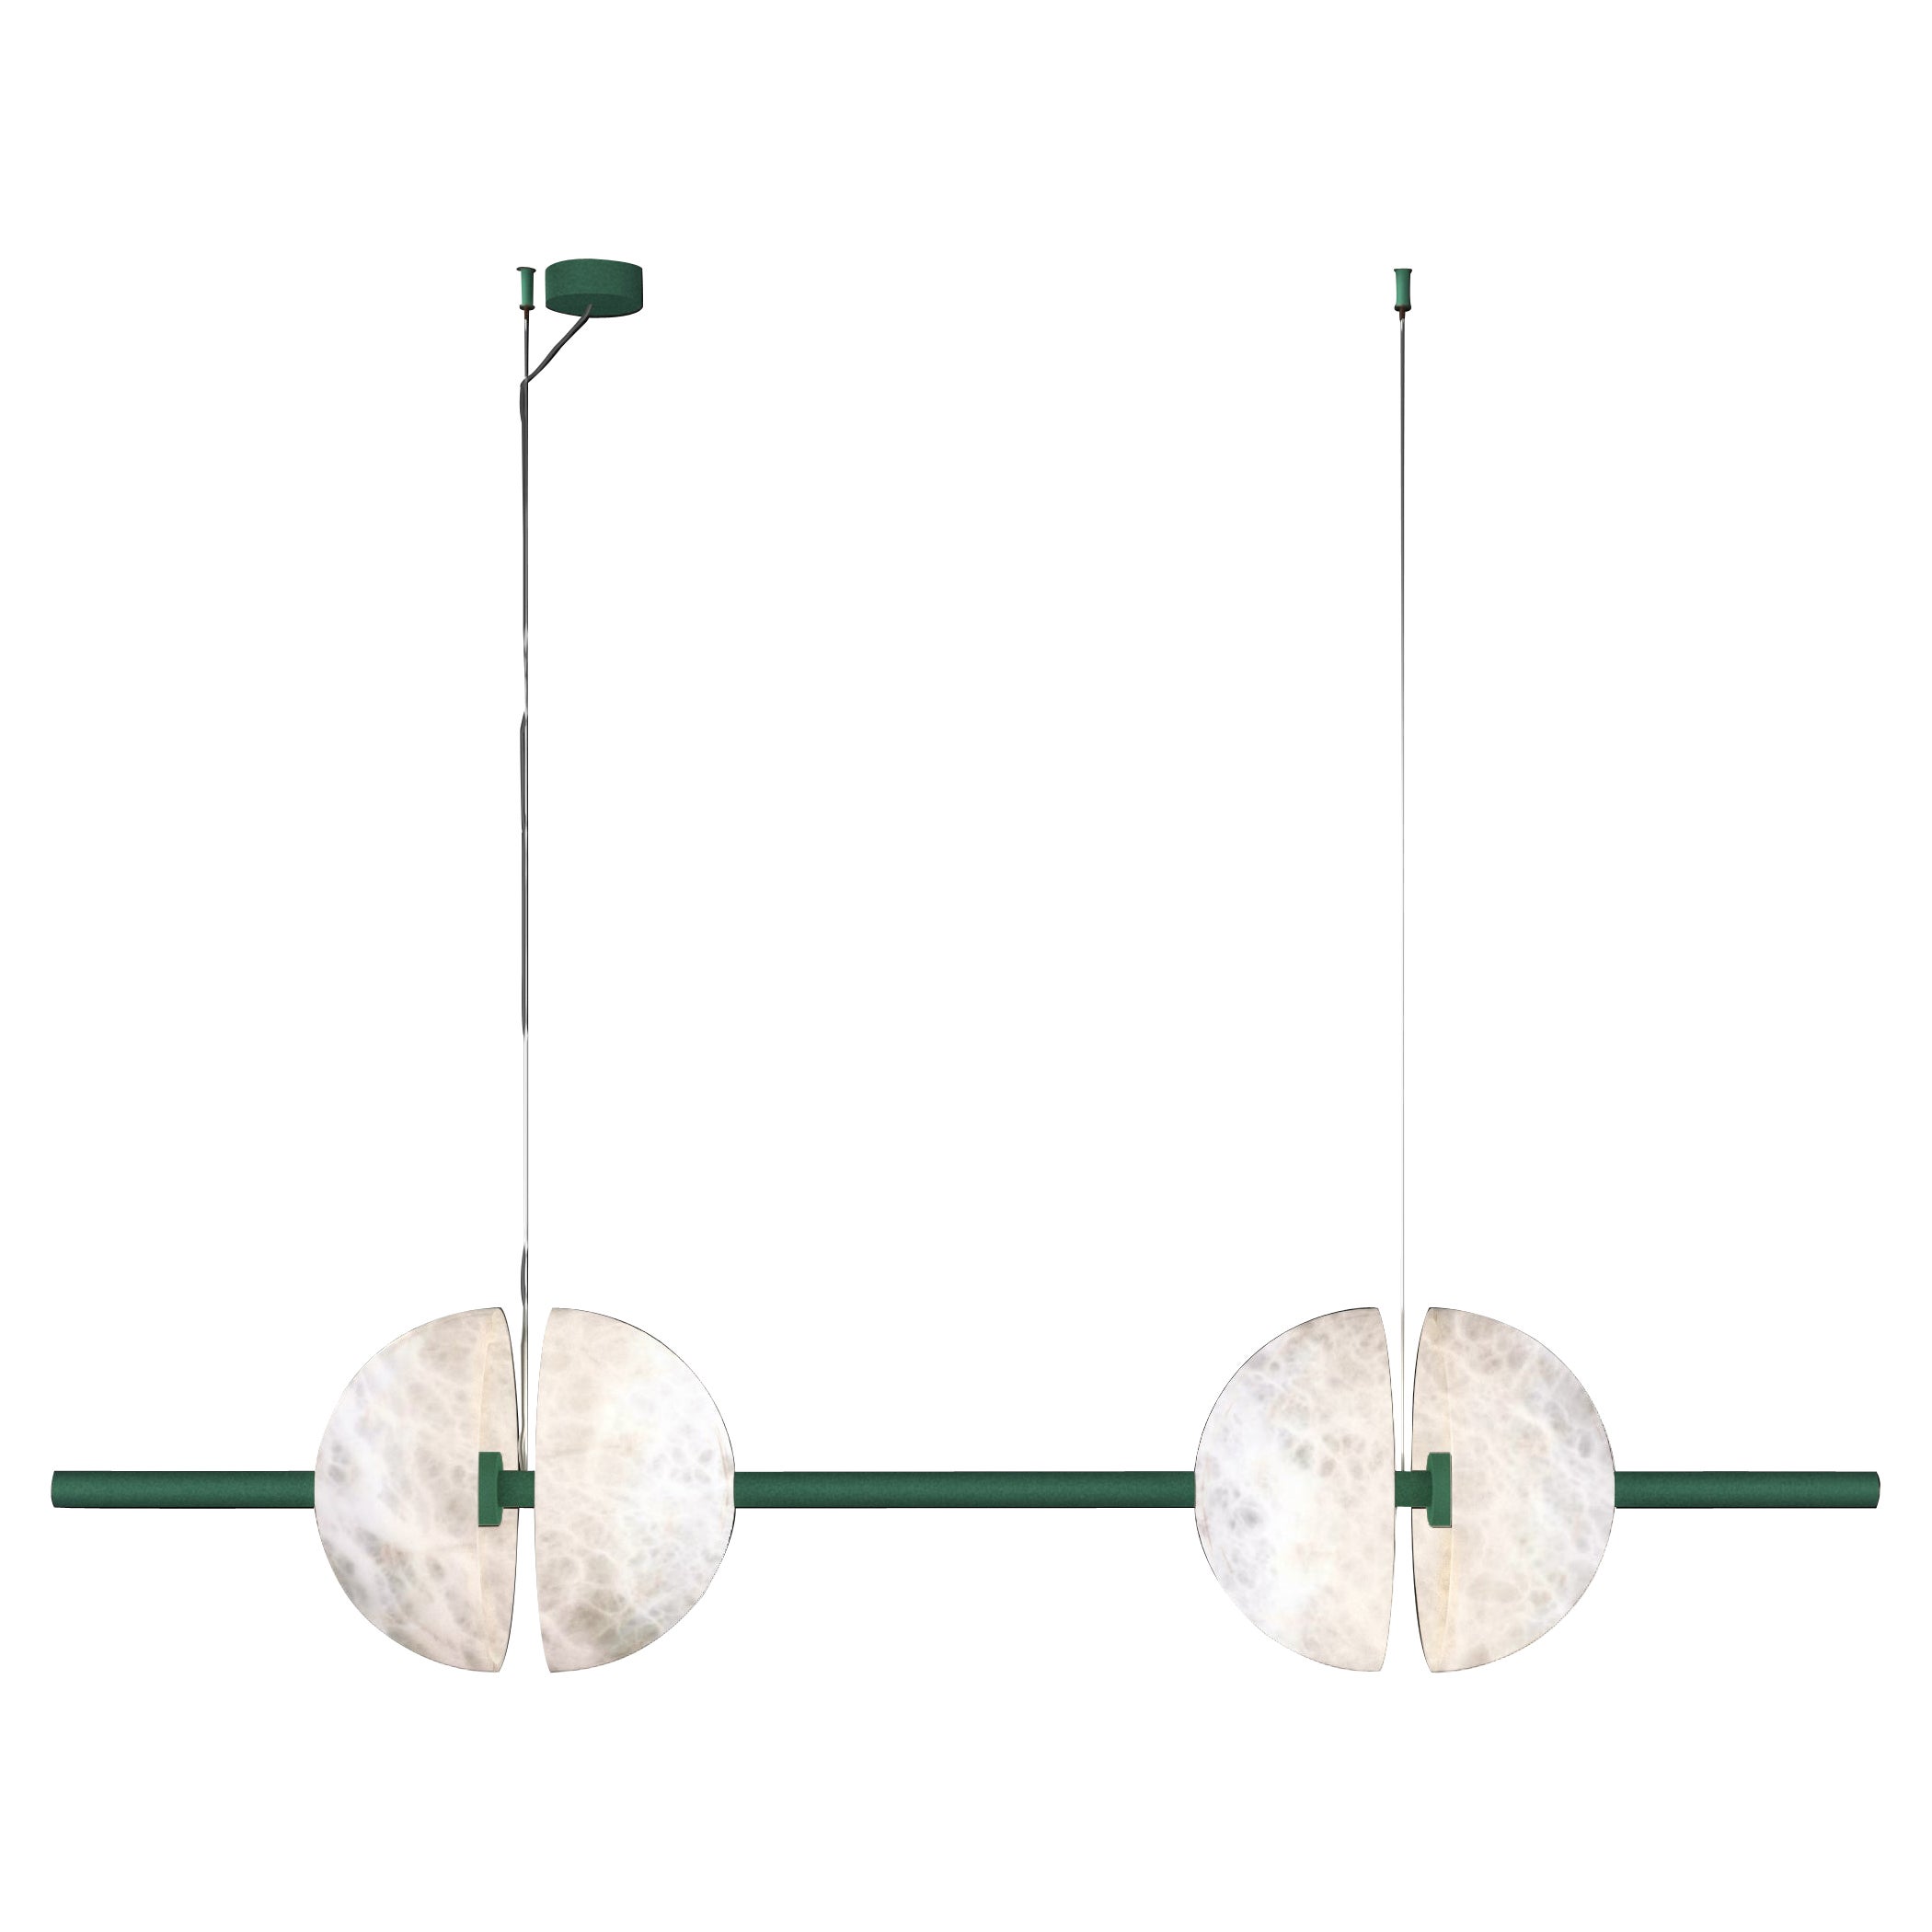 Ermes Freedom Green Metal And Alabaster Pendant Light 1 by Alabastro Italiano For Sale